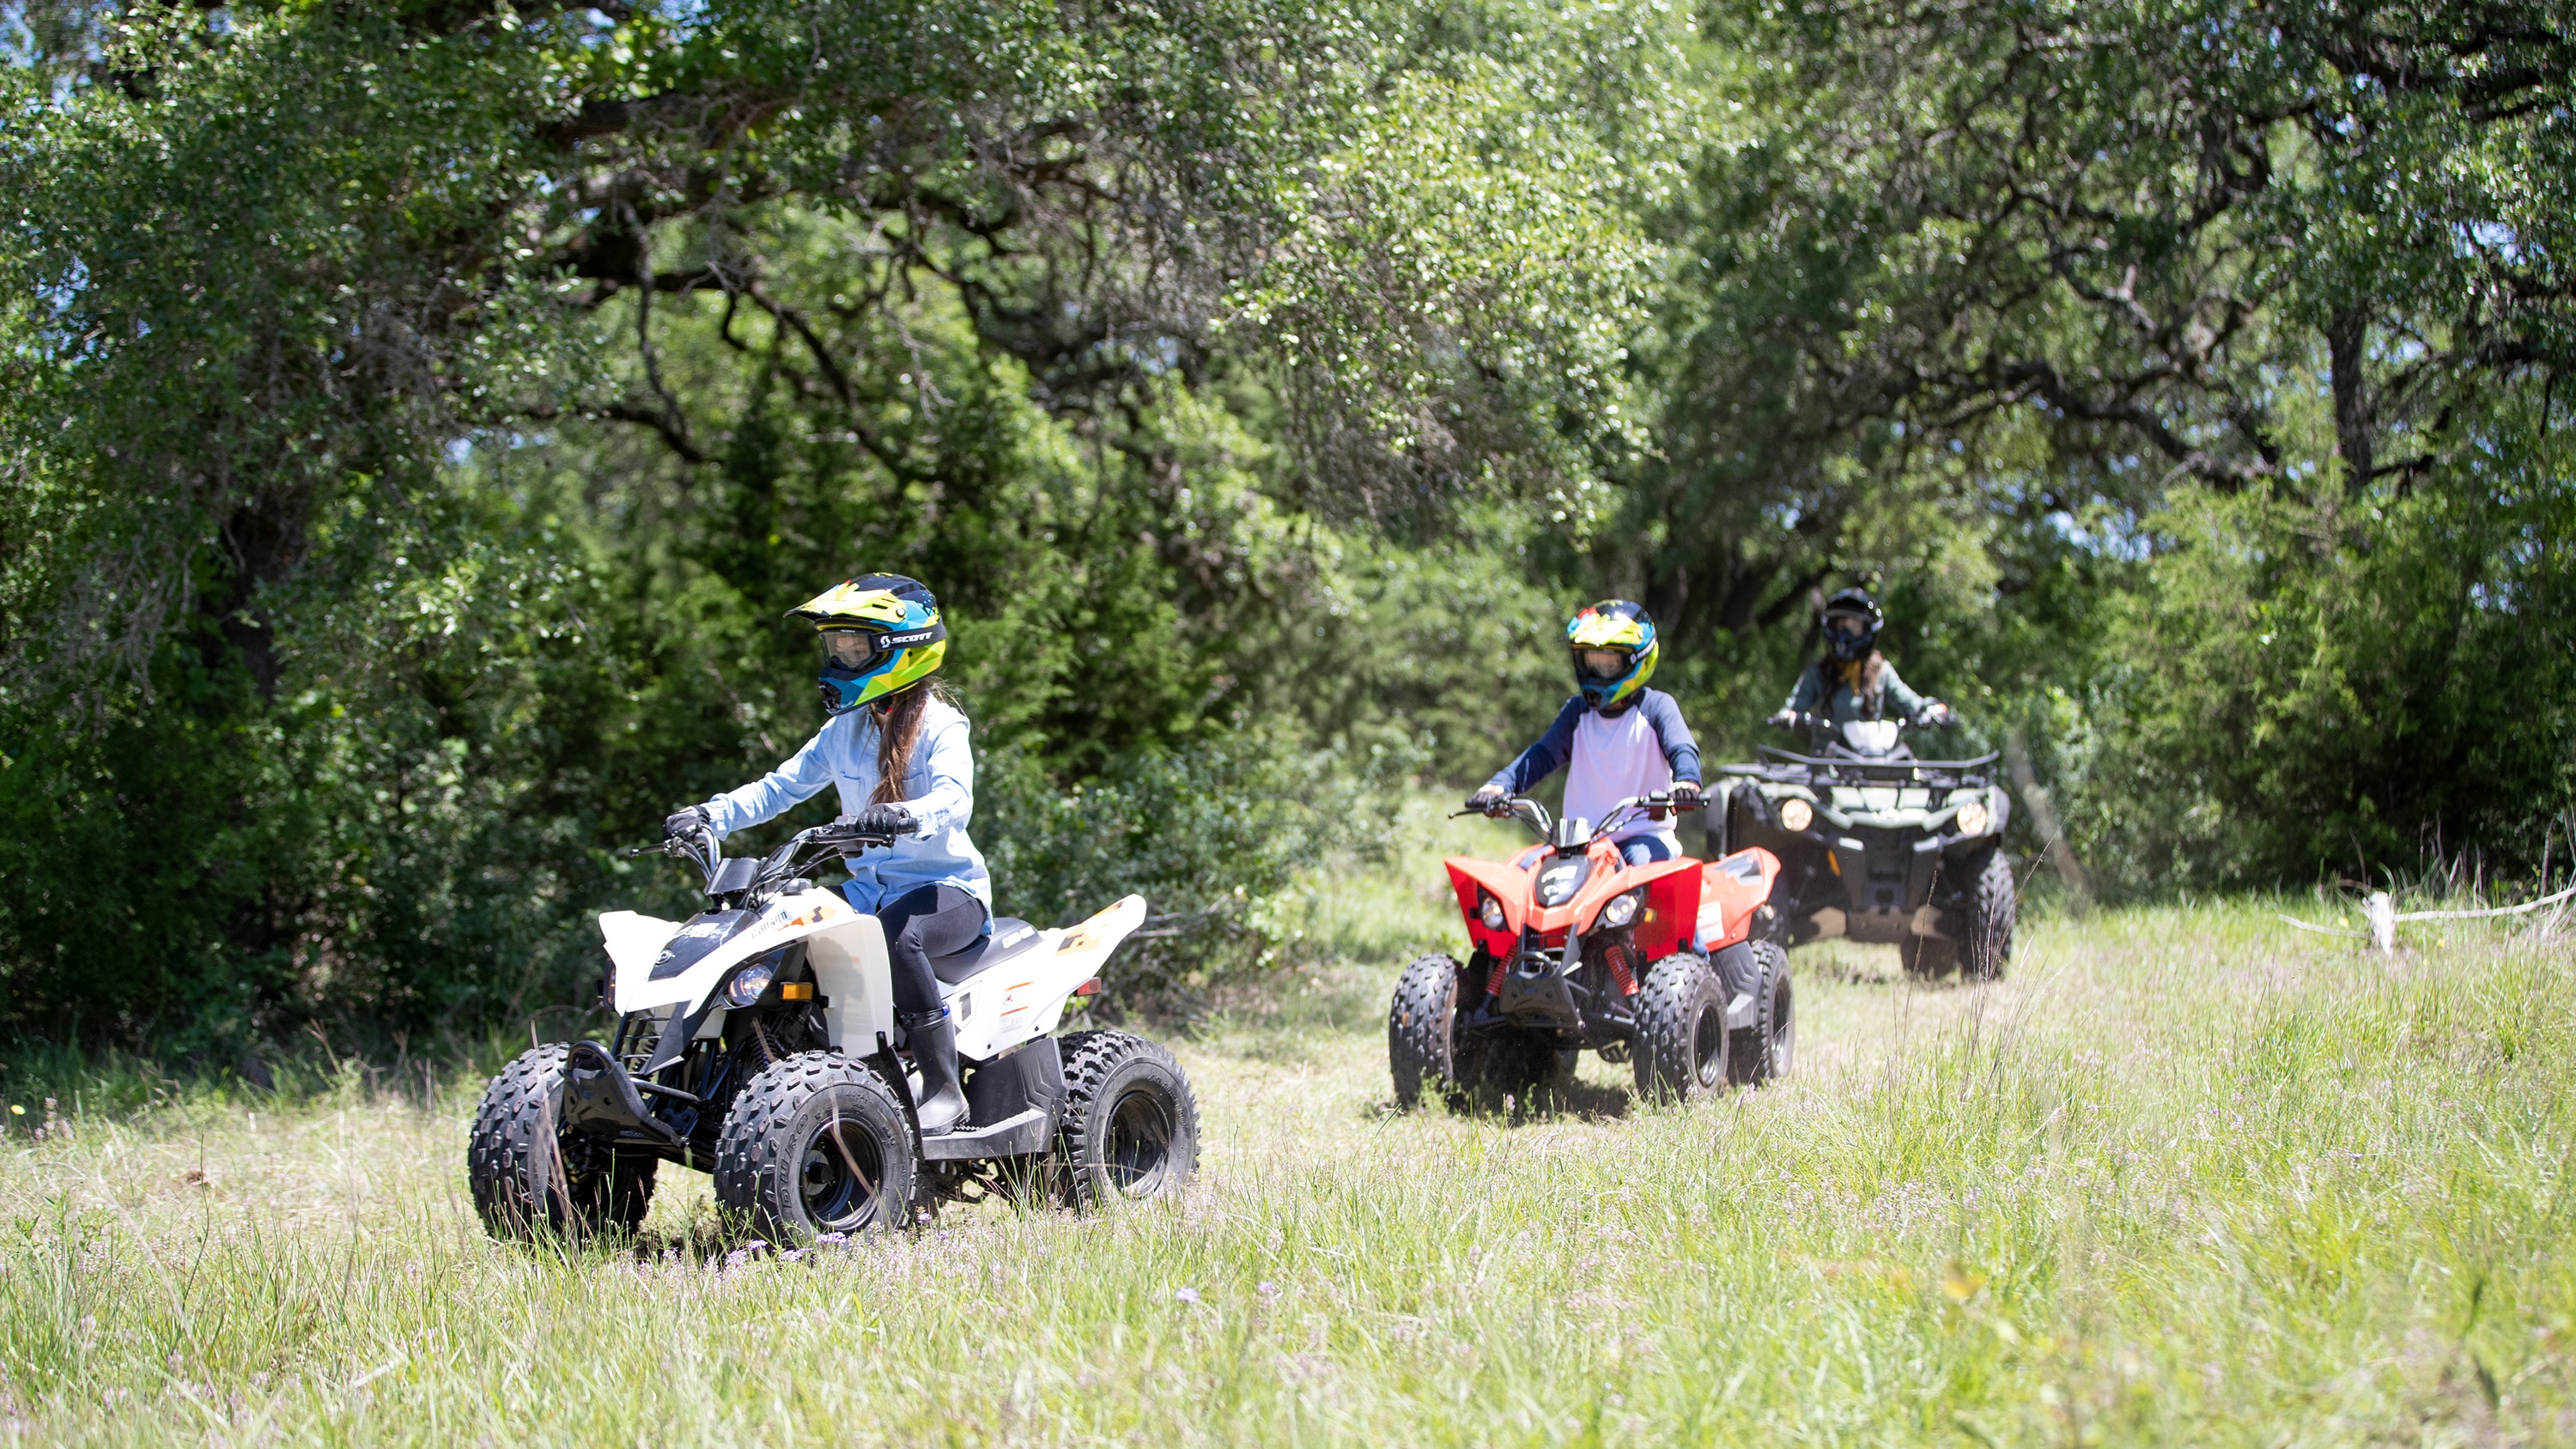 Two kids riding Can-Am DS ATVs and an adult in the background